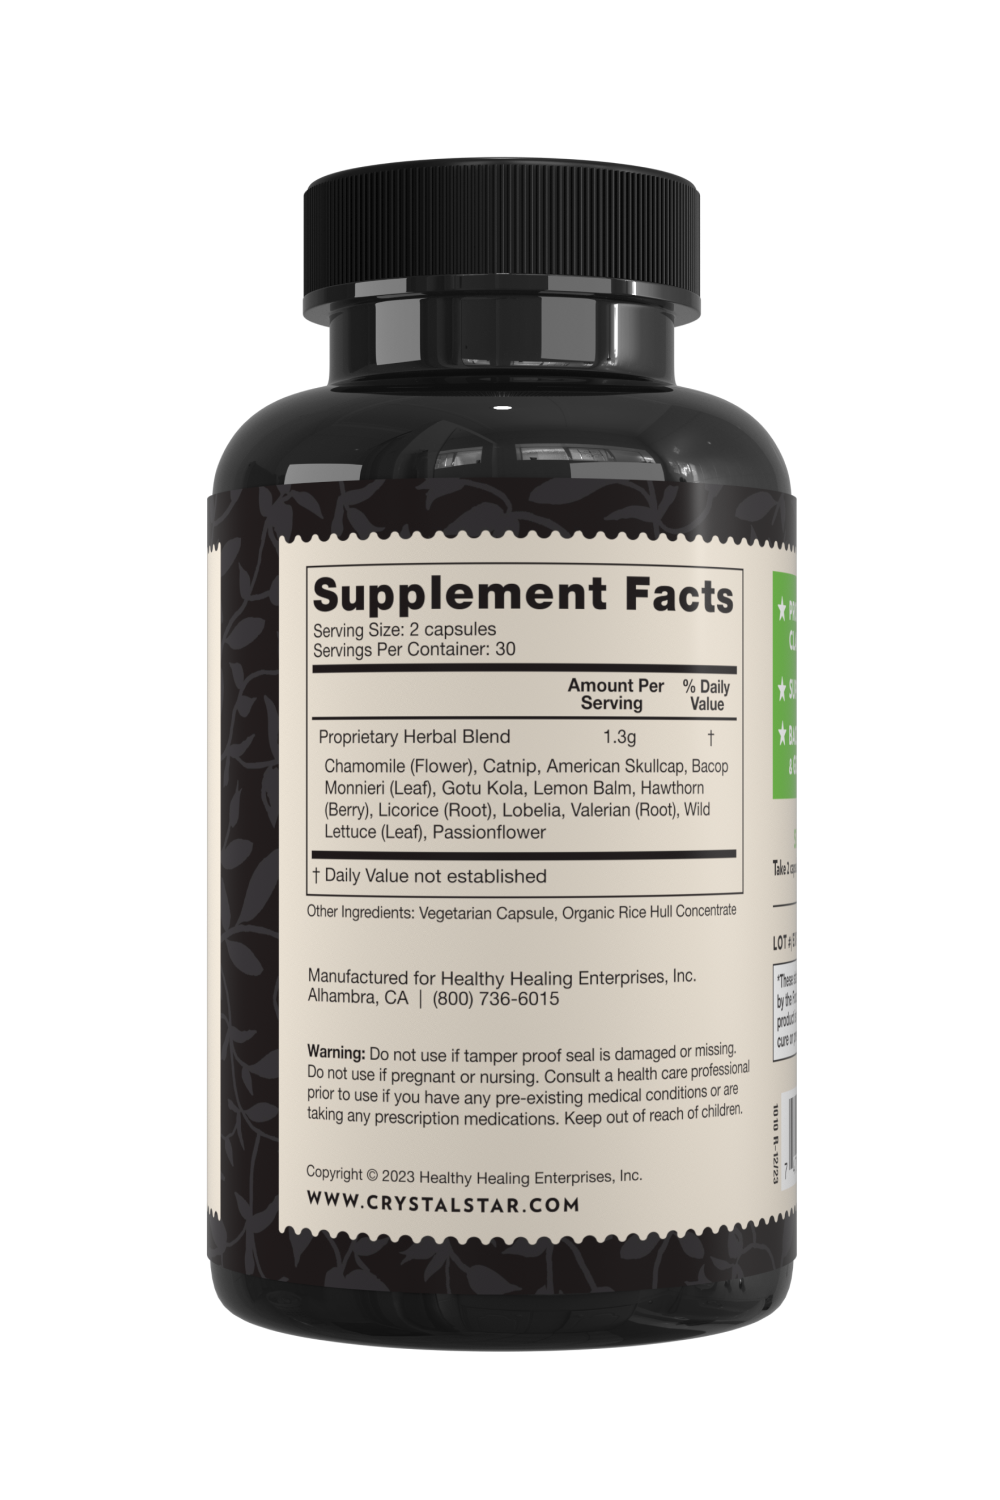 Crystal Star Focus supplement for sharpening concentration, Ingredients